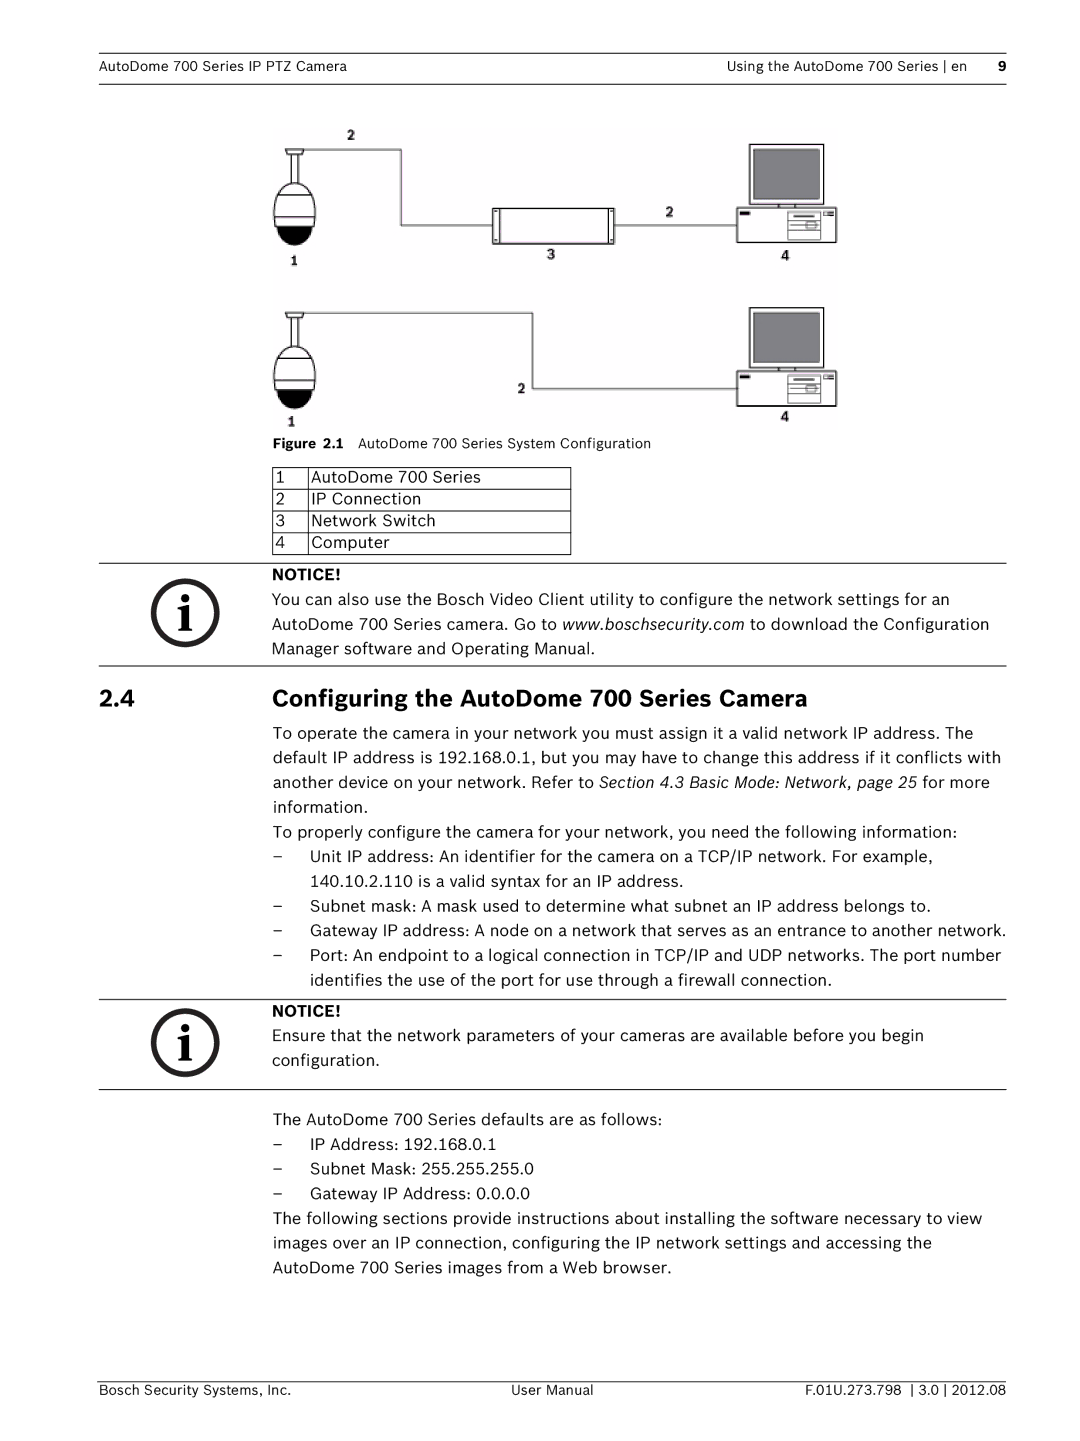 Bosch Appliances user manual Configuring the AutoDome 700 Series Camera, AutoDome 700 Series System Configuration 